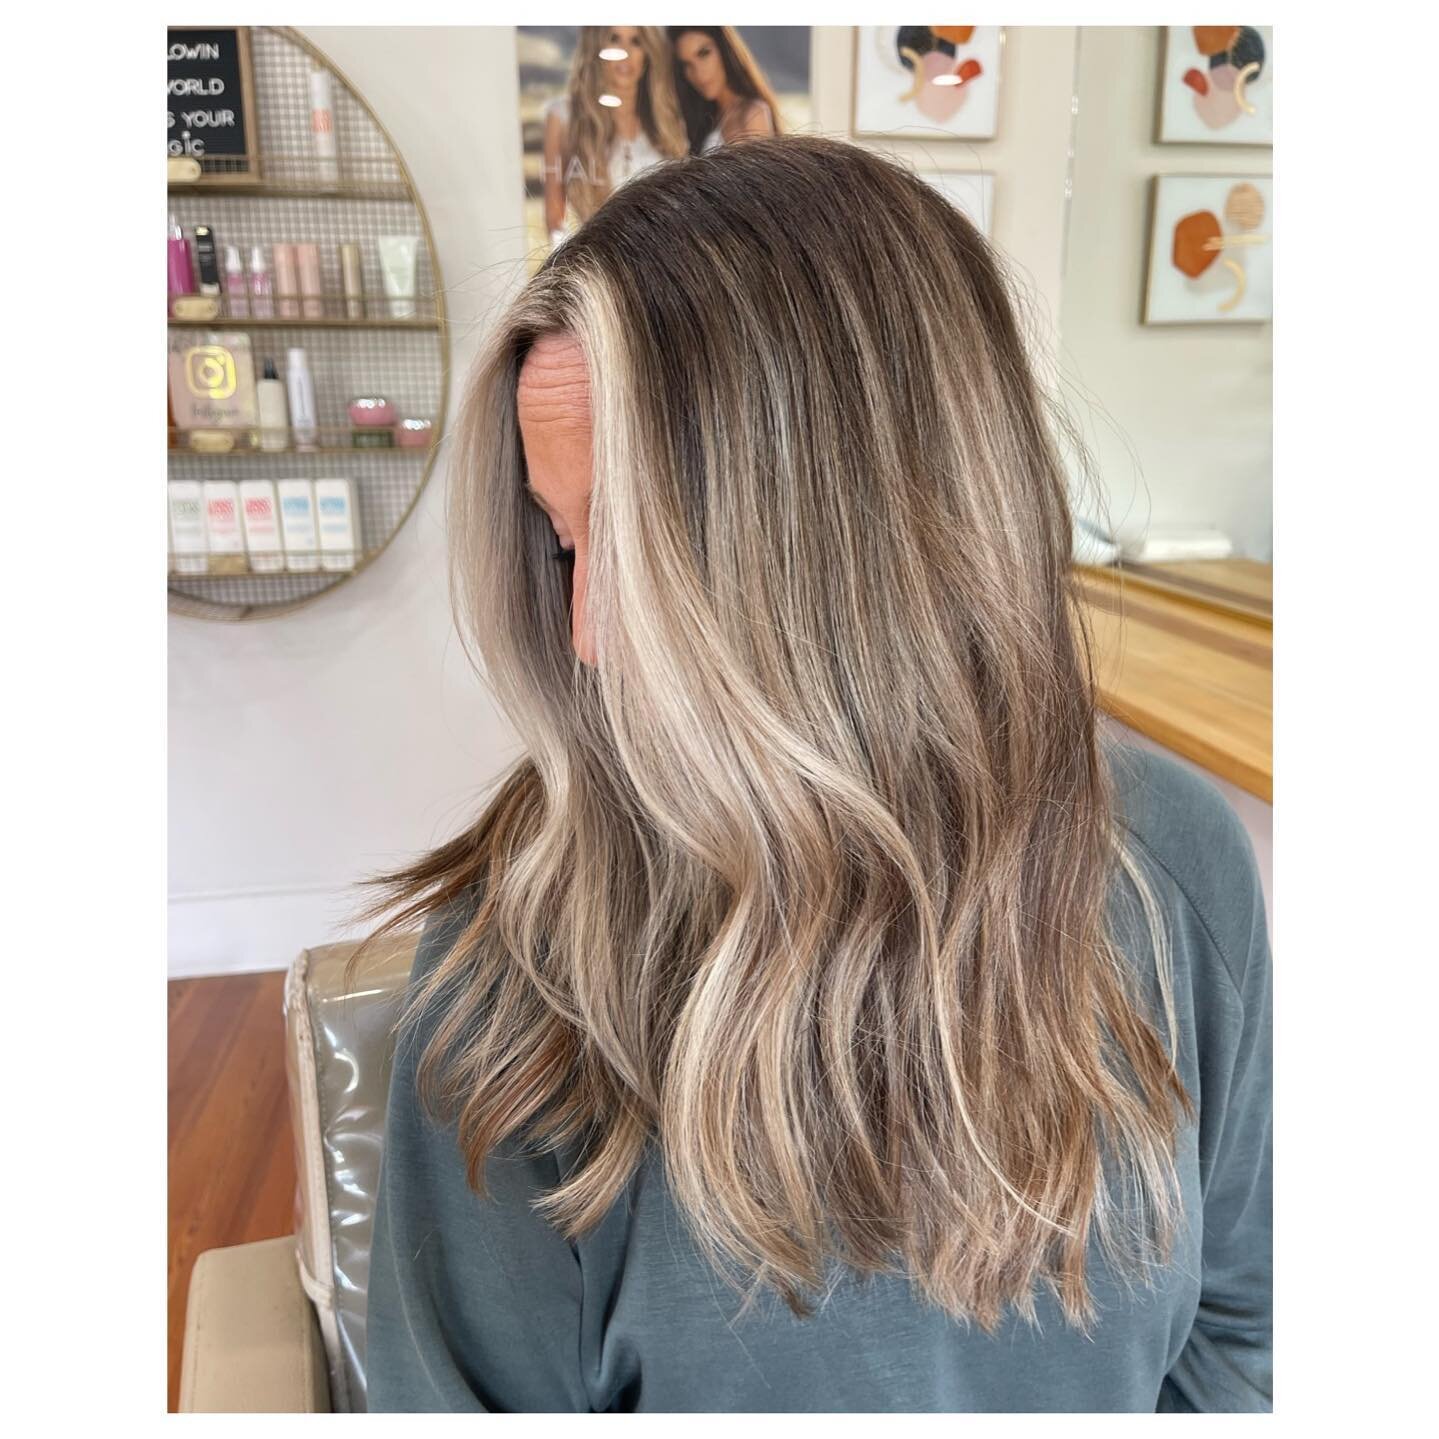 Gorgeous root melt with a bright &amp; bold money piece 🤩

Shadow root @shades_eq 6N,6T,7N
All over gloss @shades_eq 10N, 10VV, 9P
@redken 
@behindthechair_stylist 
@behindthechair_com 
@hairbrained_official 

#coloreducation #crafthairdresser #cuta